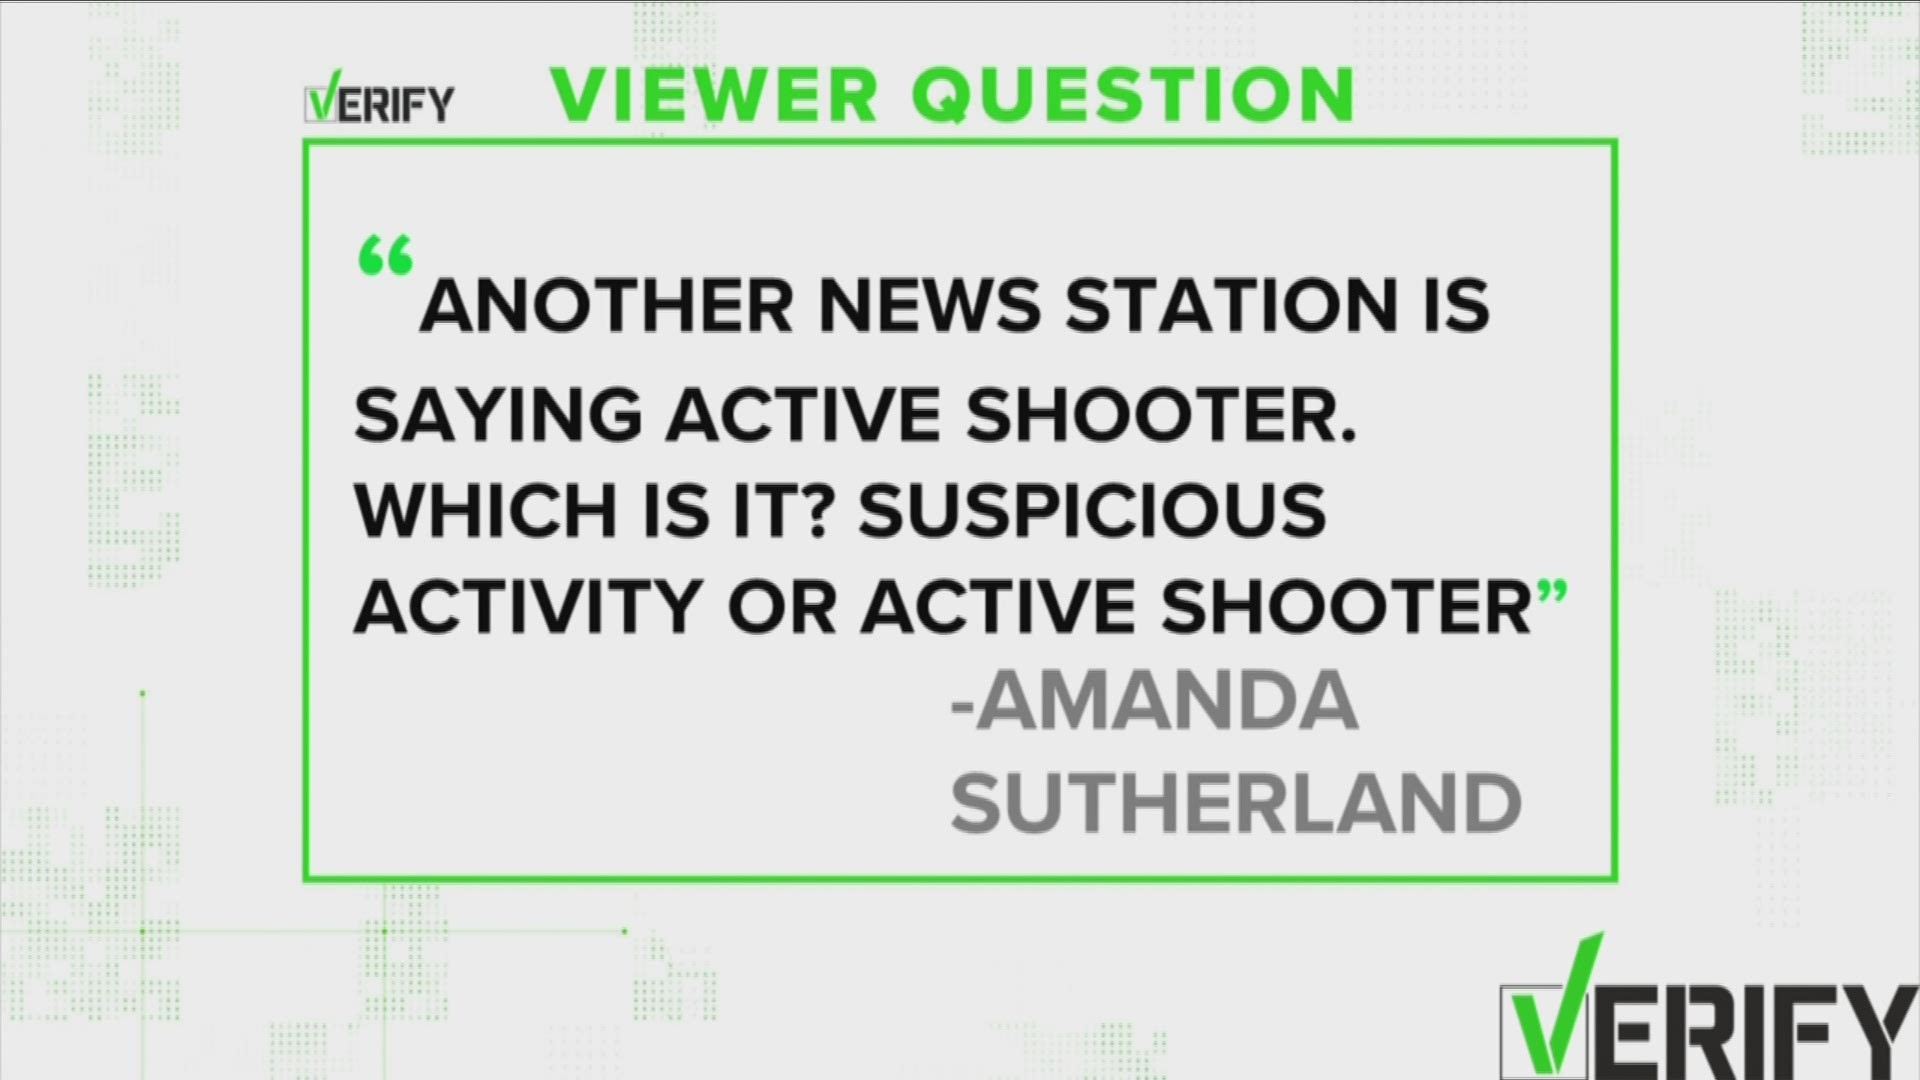 During a lockdown at the air base, some media reported an active shooter. WBIR did not. We VERIFY how we confirmed information for reporting.